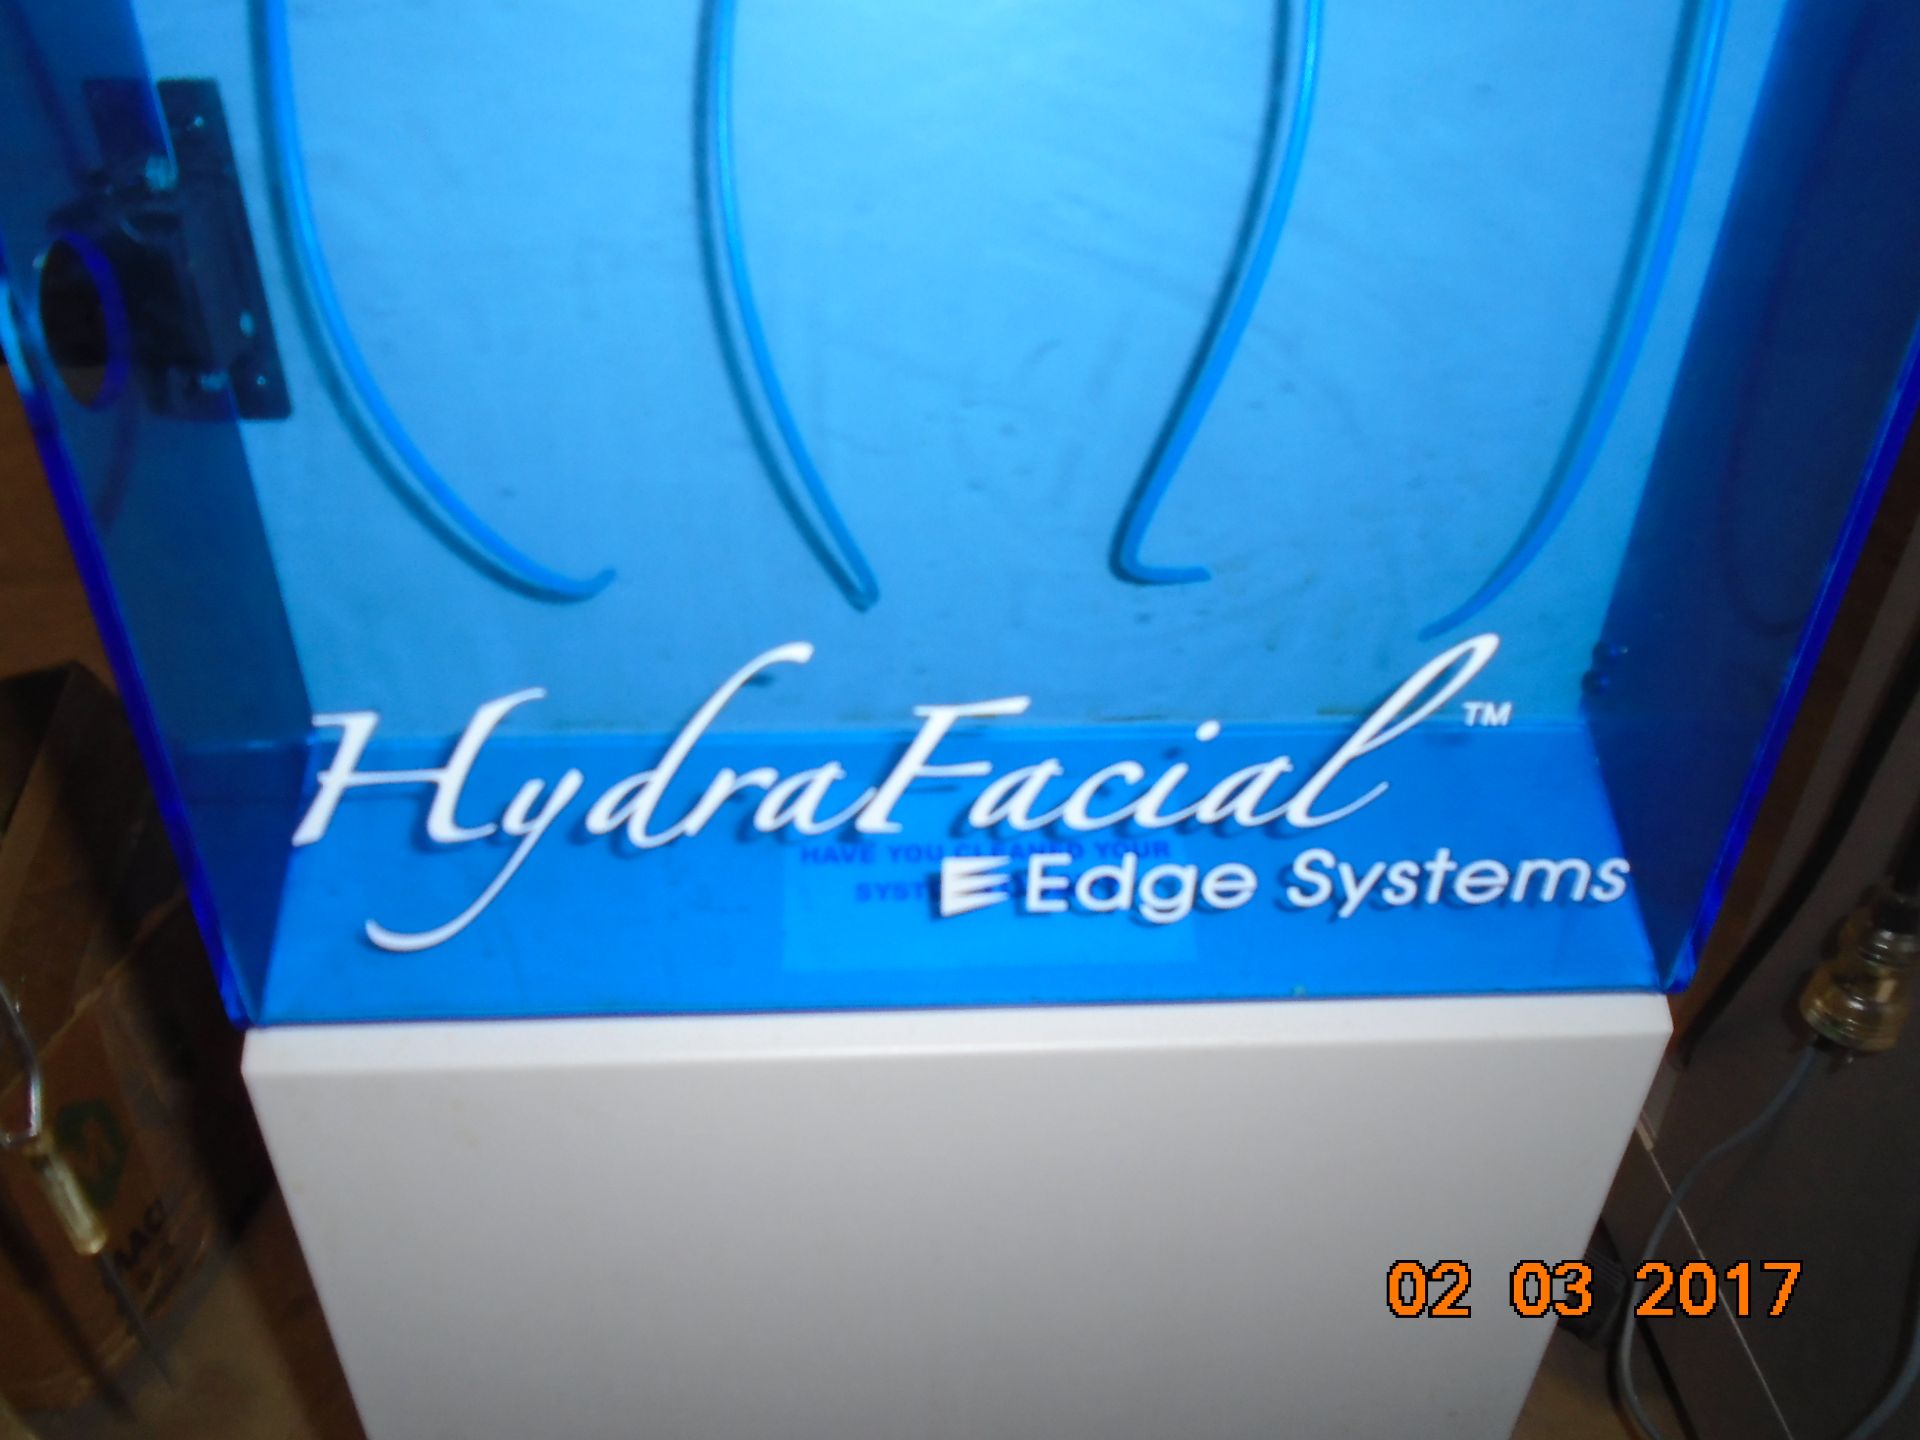 EDGE SYSTEMS HYDRA FACIAL UNIT, SN. HMD1301-1180 - Image 2 of 4